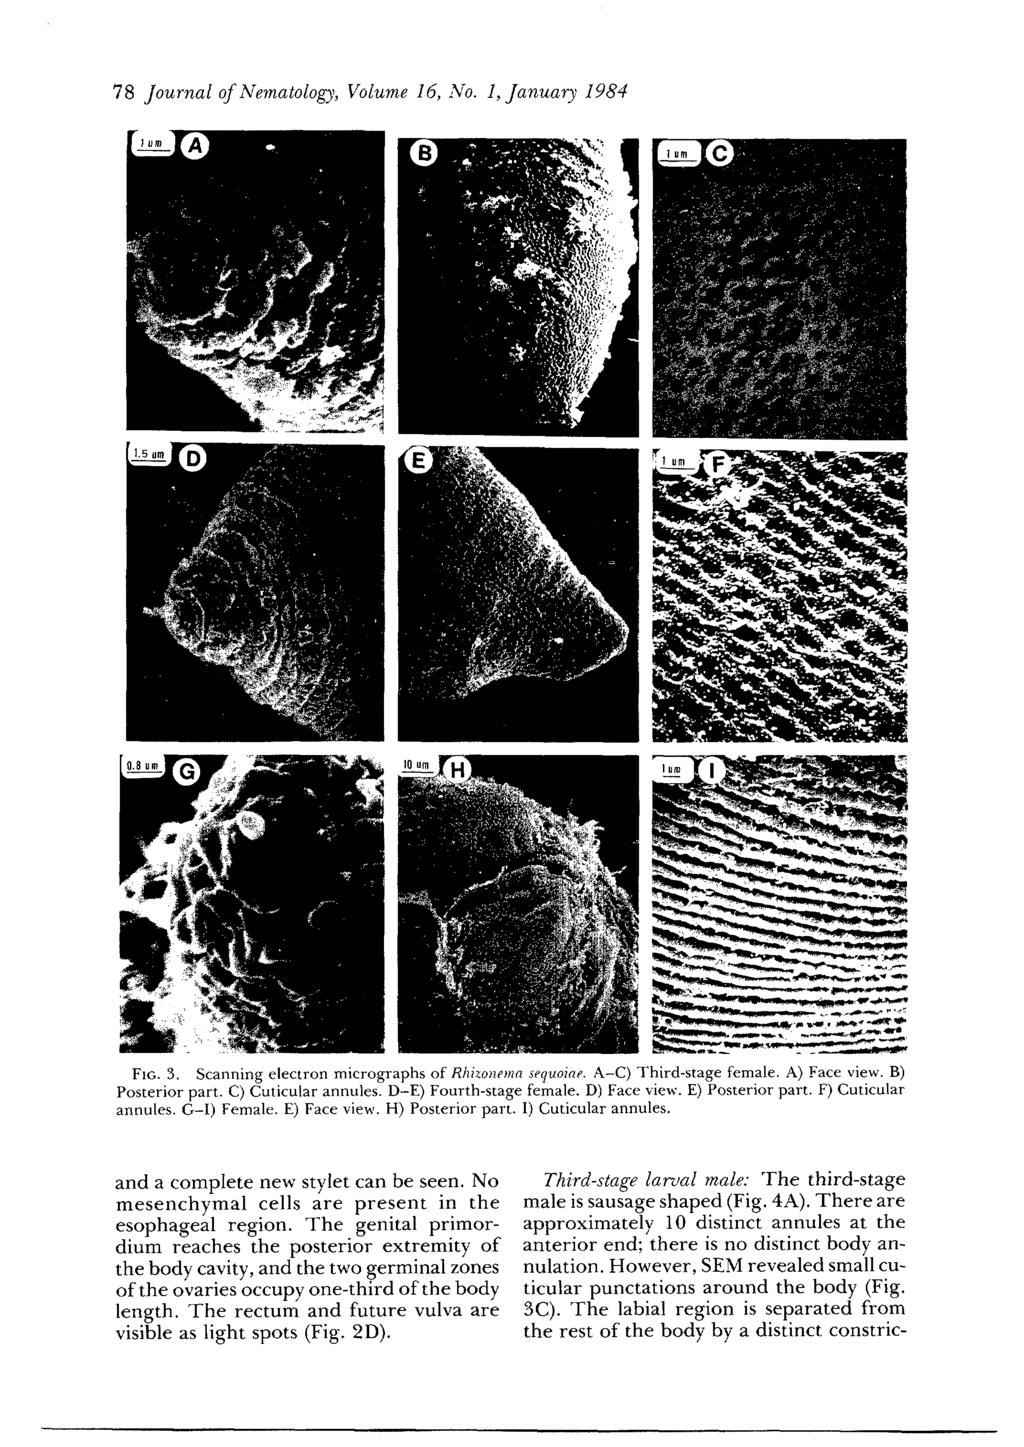 78 Journal of Nematolog)~, Volume 16, 1%. 1, Januarj 1984 FIG. 3. Scanning electron micrographs of R1lizo)zr)nn srquoin~. A-C) Third-stage female. A) Face view. B) Posterior part.